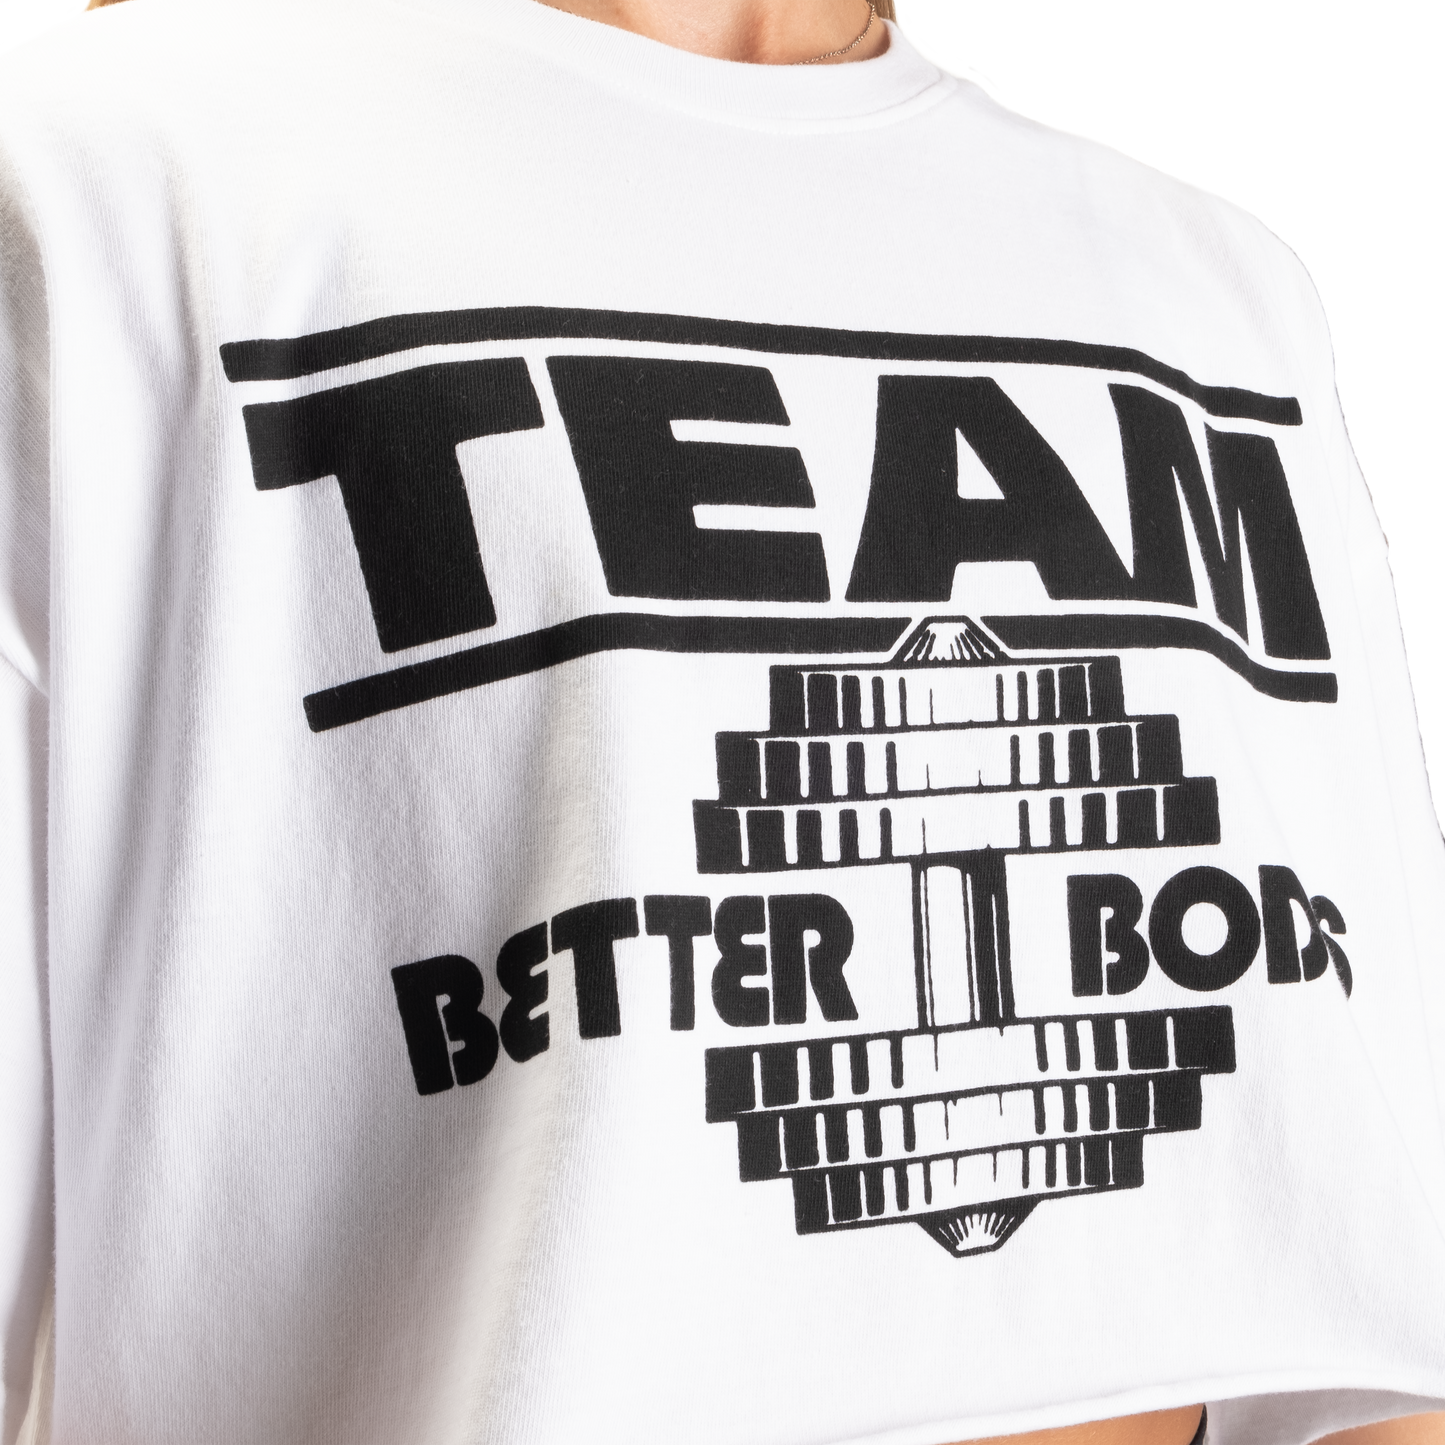 Better Bodies Team One Size Tee, White